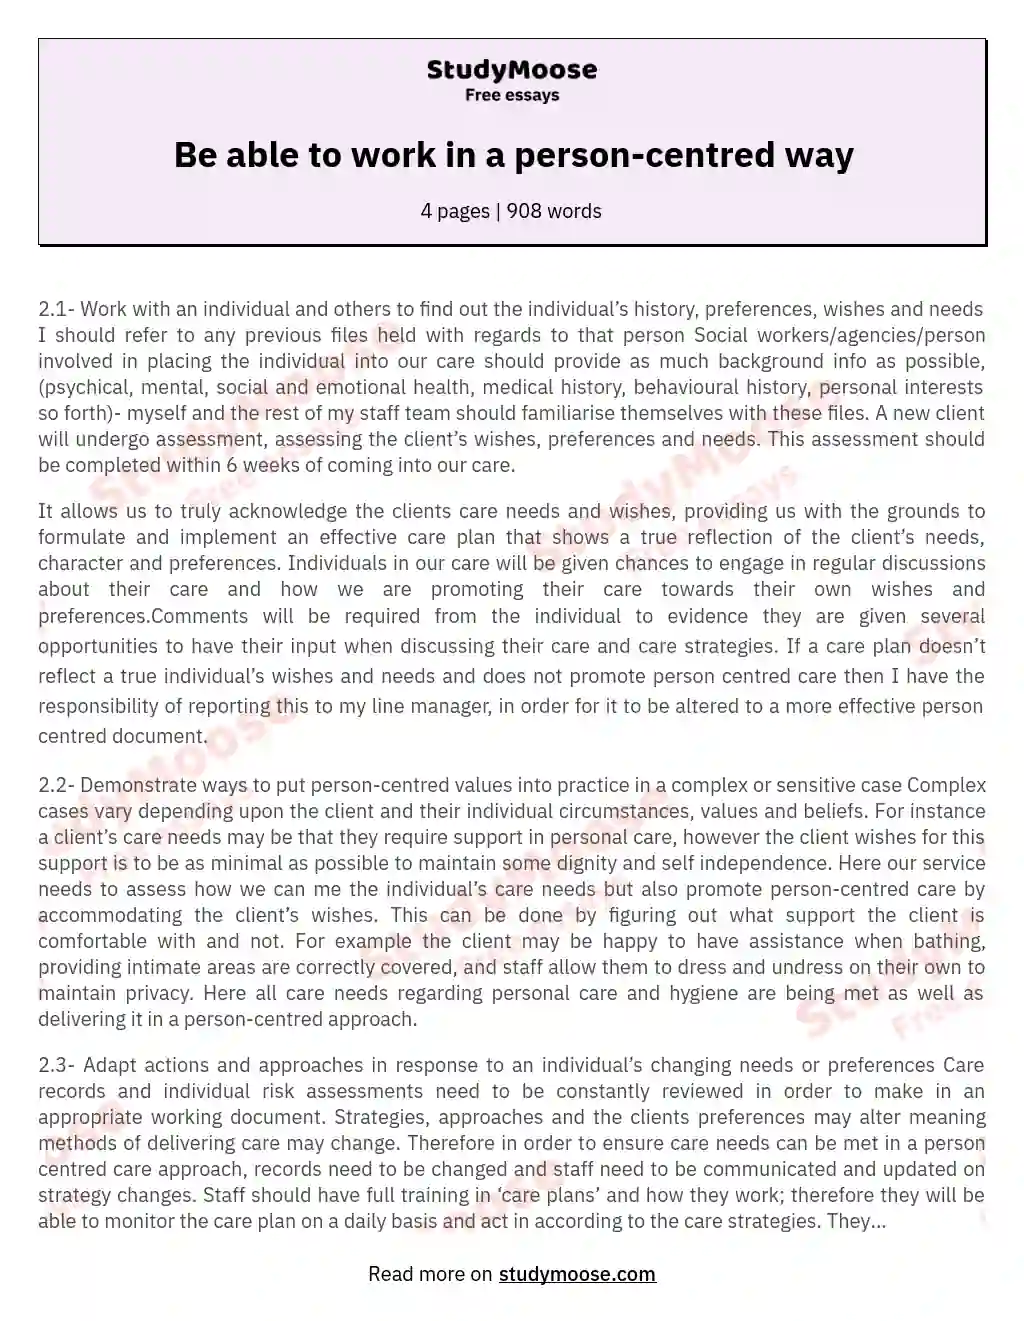 Be able to work in a person-centred way essay